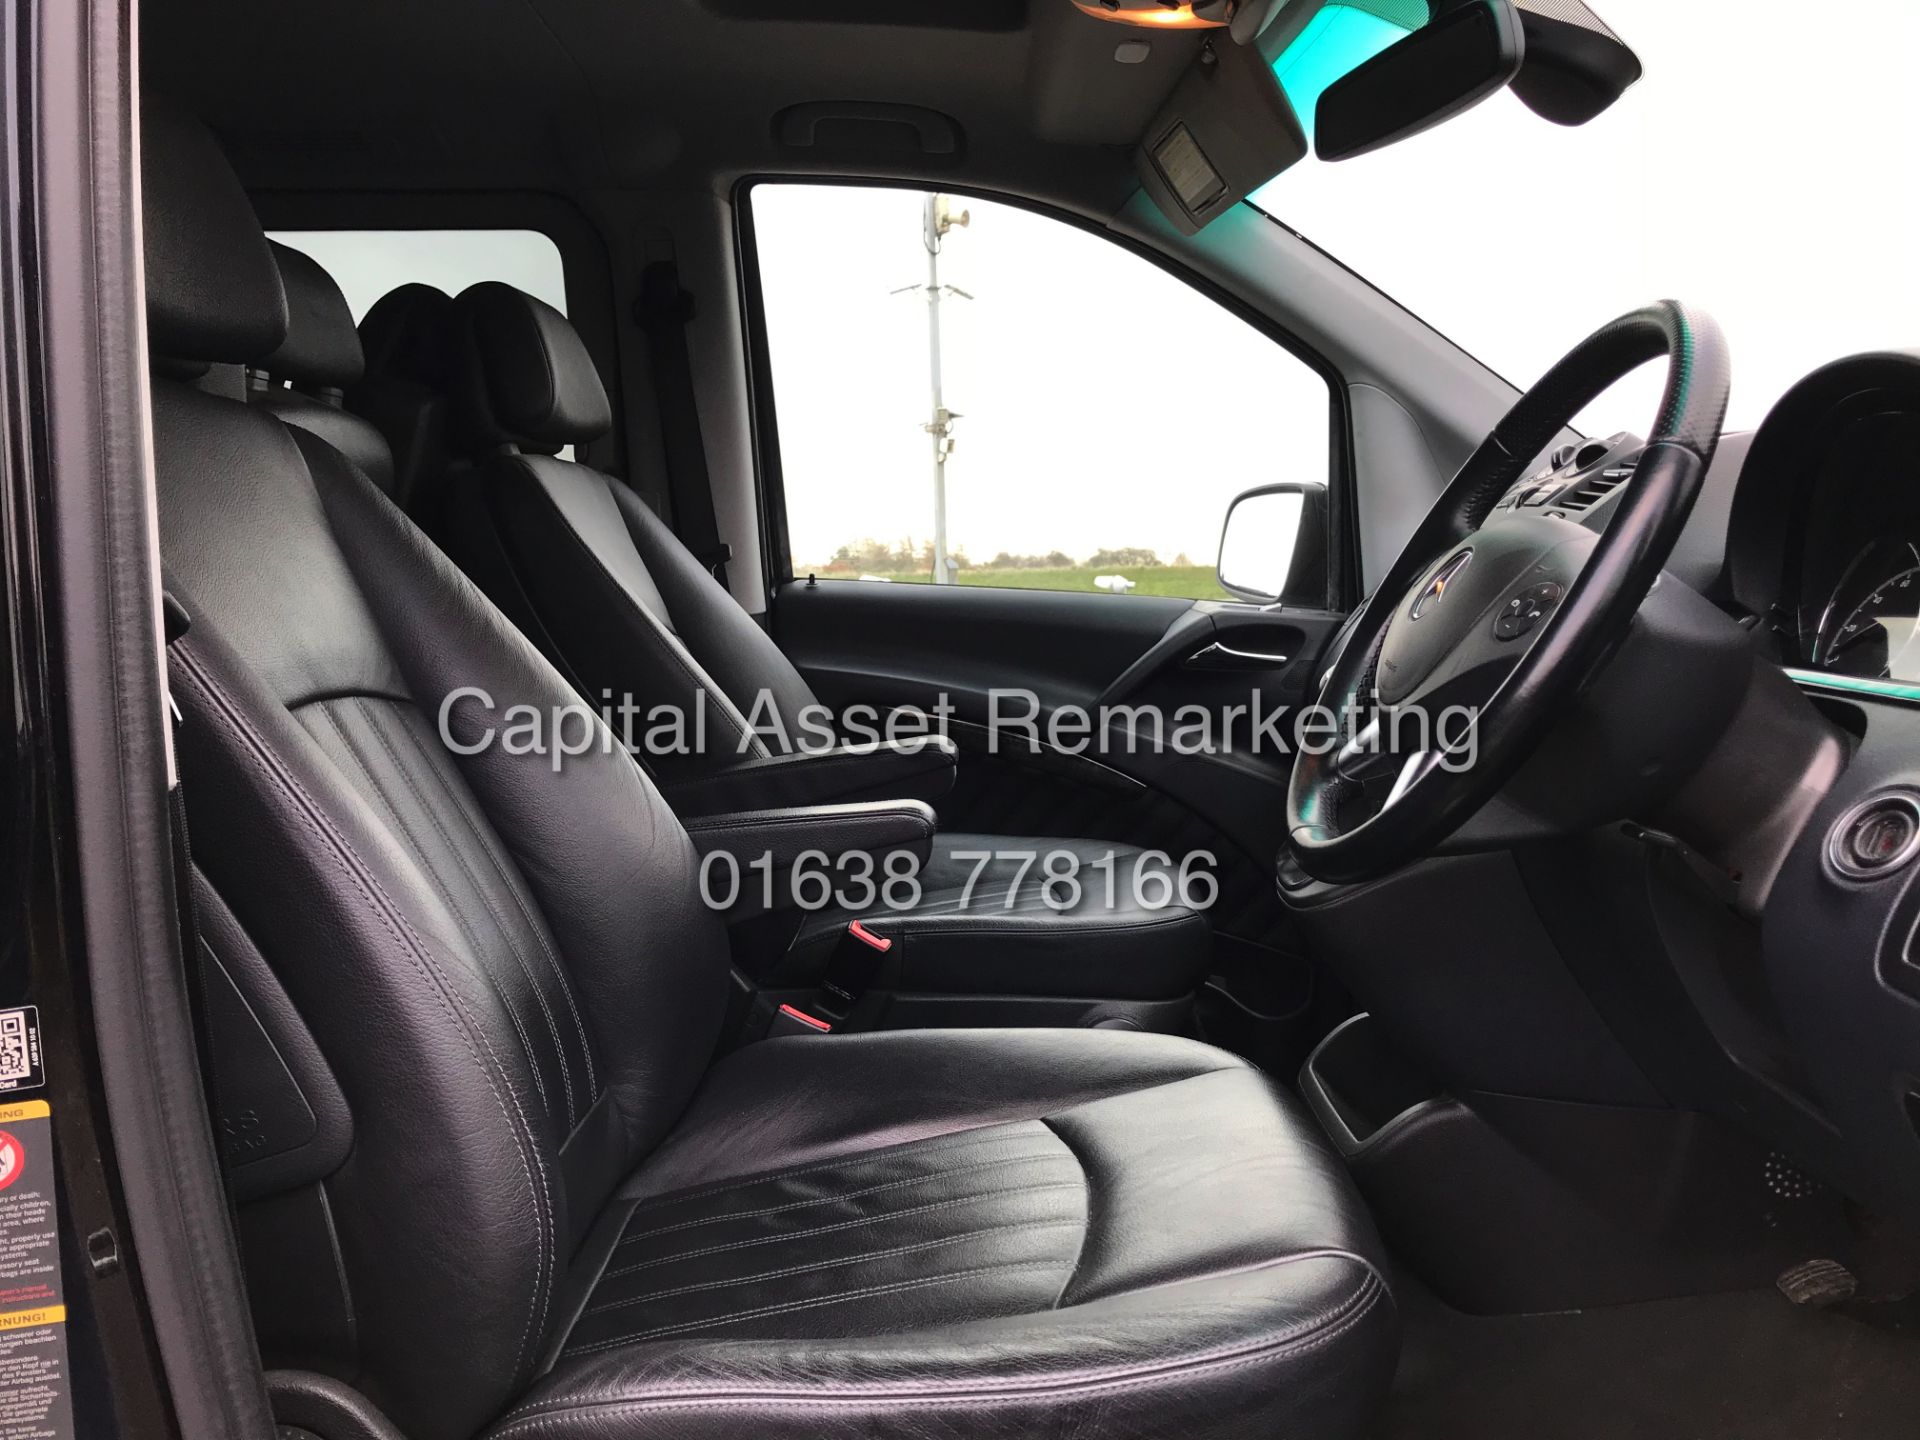 (ON SALE) MERCEDES VIANO 2.2CDI "AMBIENET" XLWB 8 SEATER (14 REG) 1 OWNER - FULLY LOADED - LEATHER - Image 9 of 28